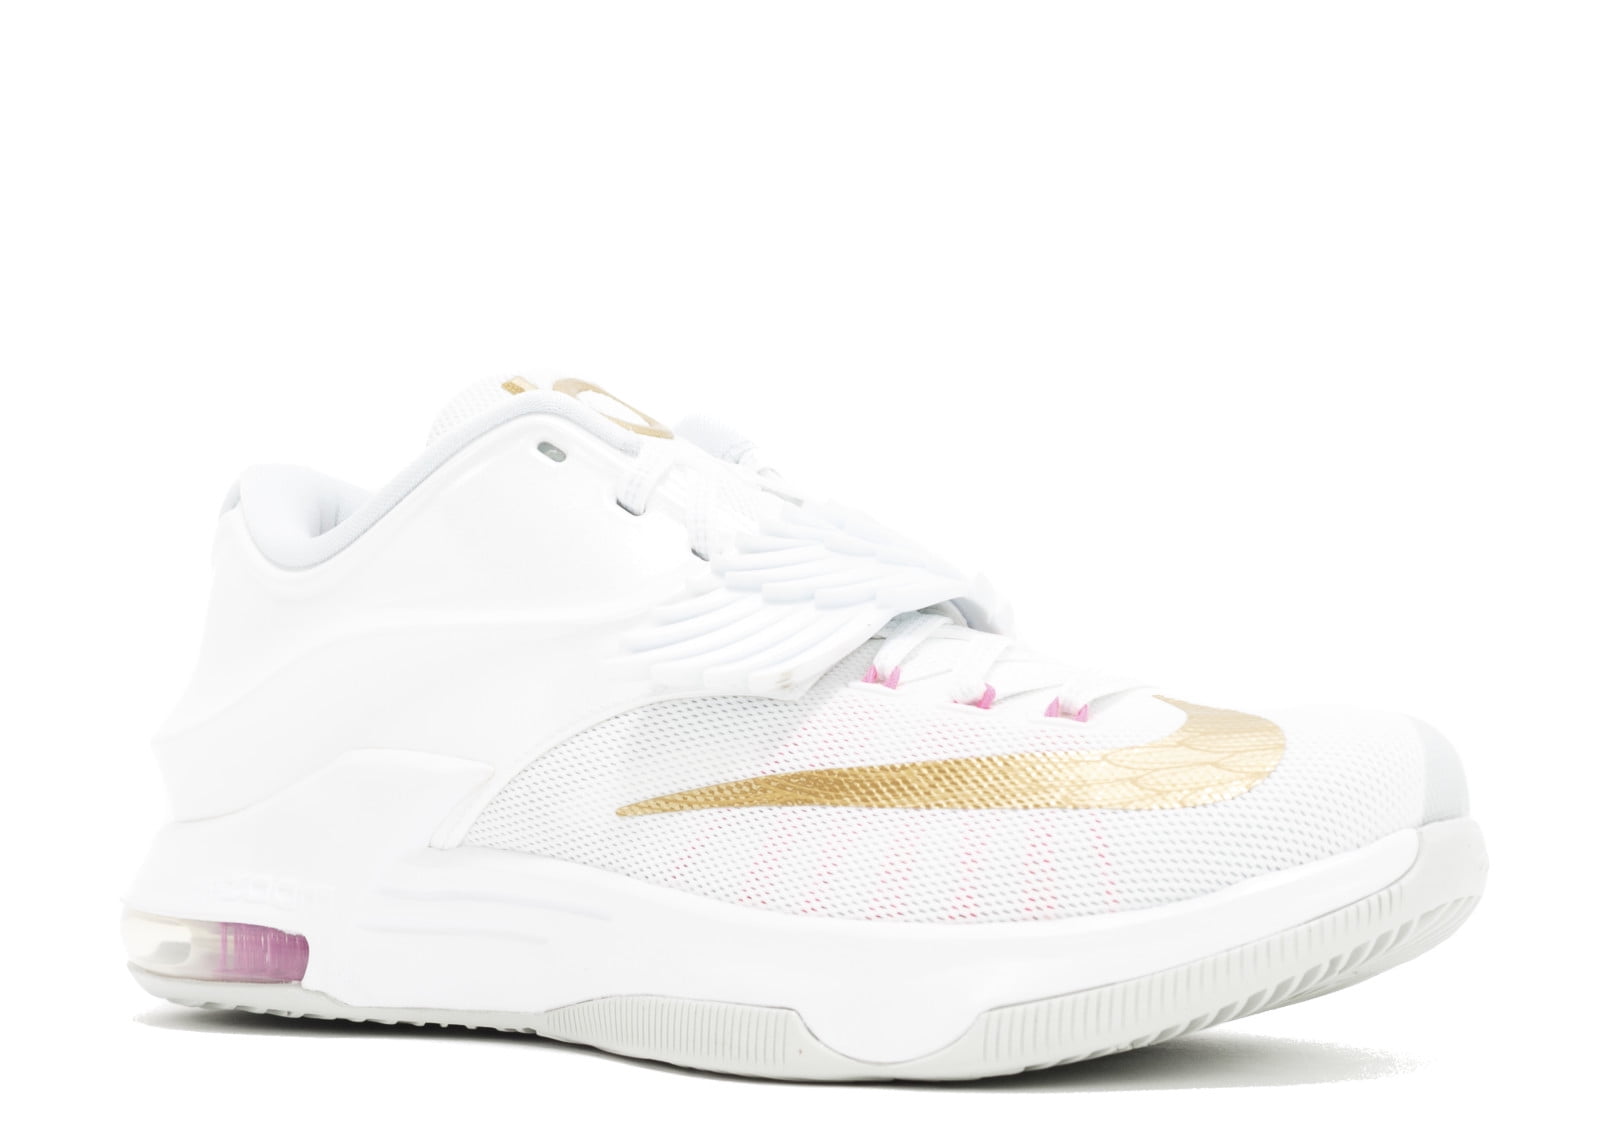 aunt pearl kd 7